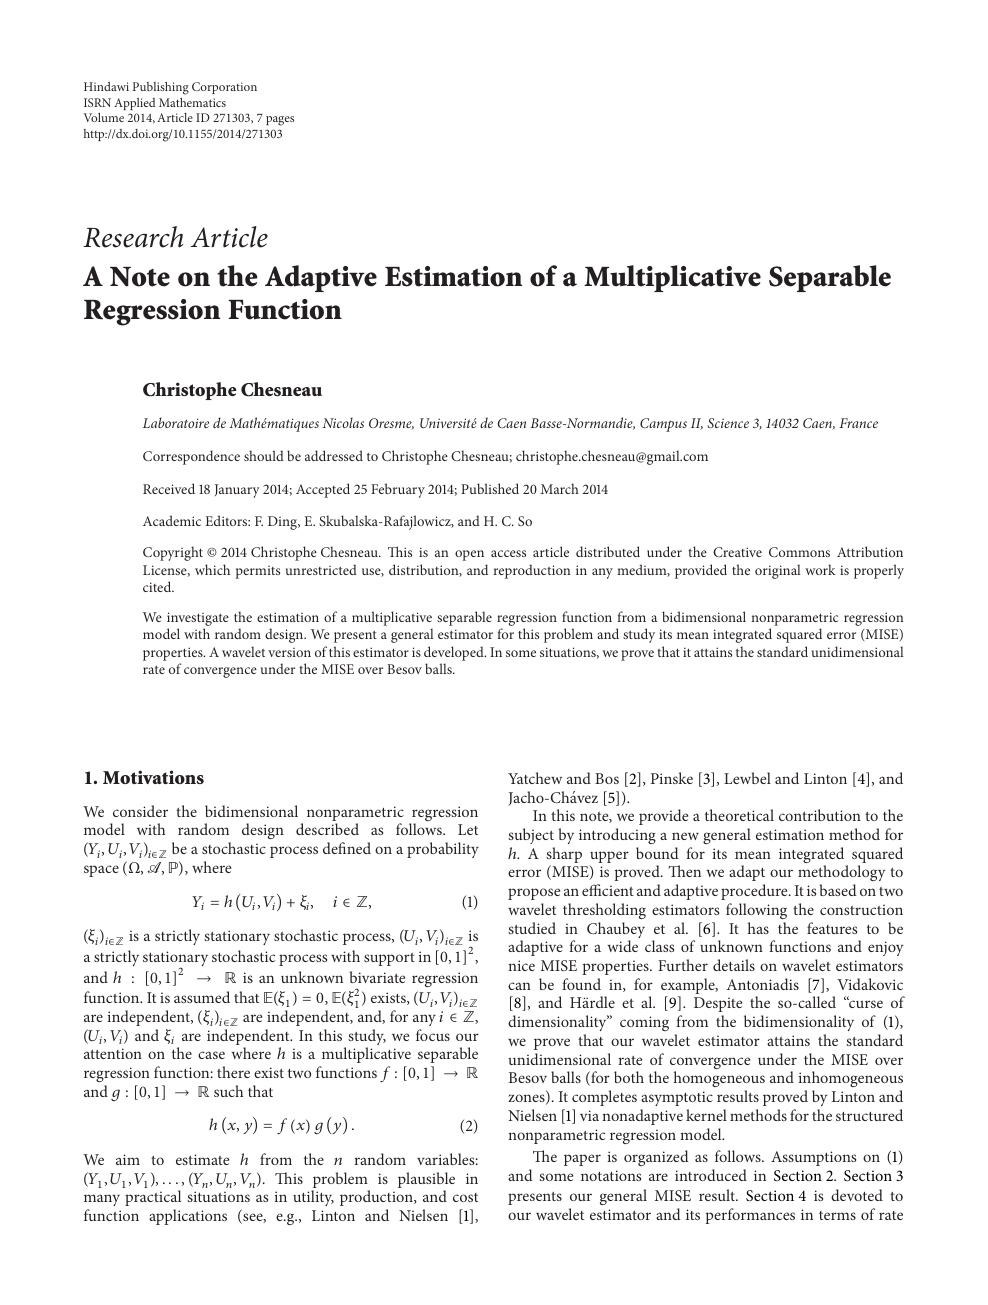 A Note On The Adaptive Estimation Of A Multiplicative Separable Regression Function Topic Of Research Paper In Mathematics Download Scholarly Article Pdf And Read For Free On Cyberleninka Open Science Hub